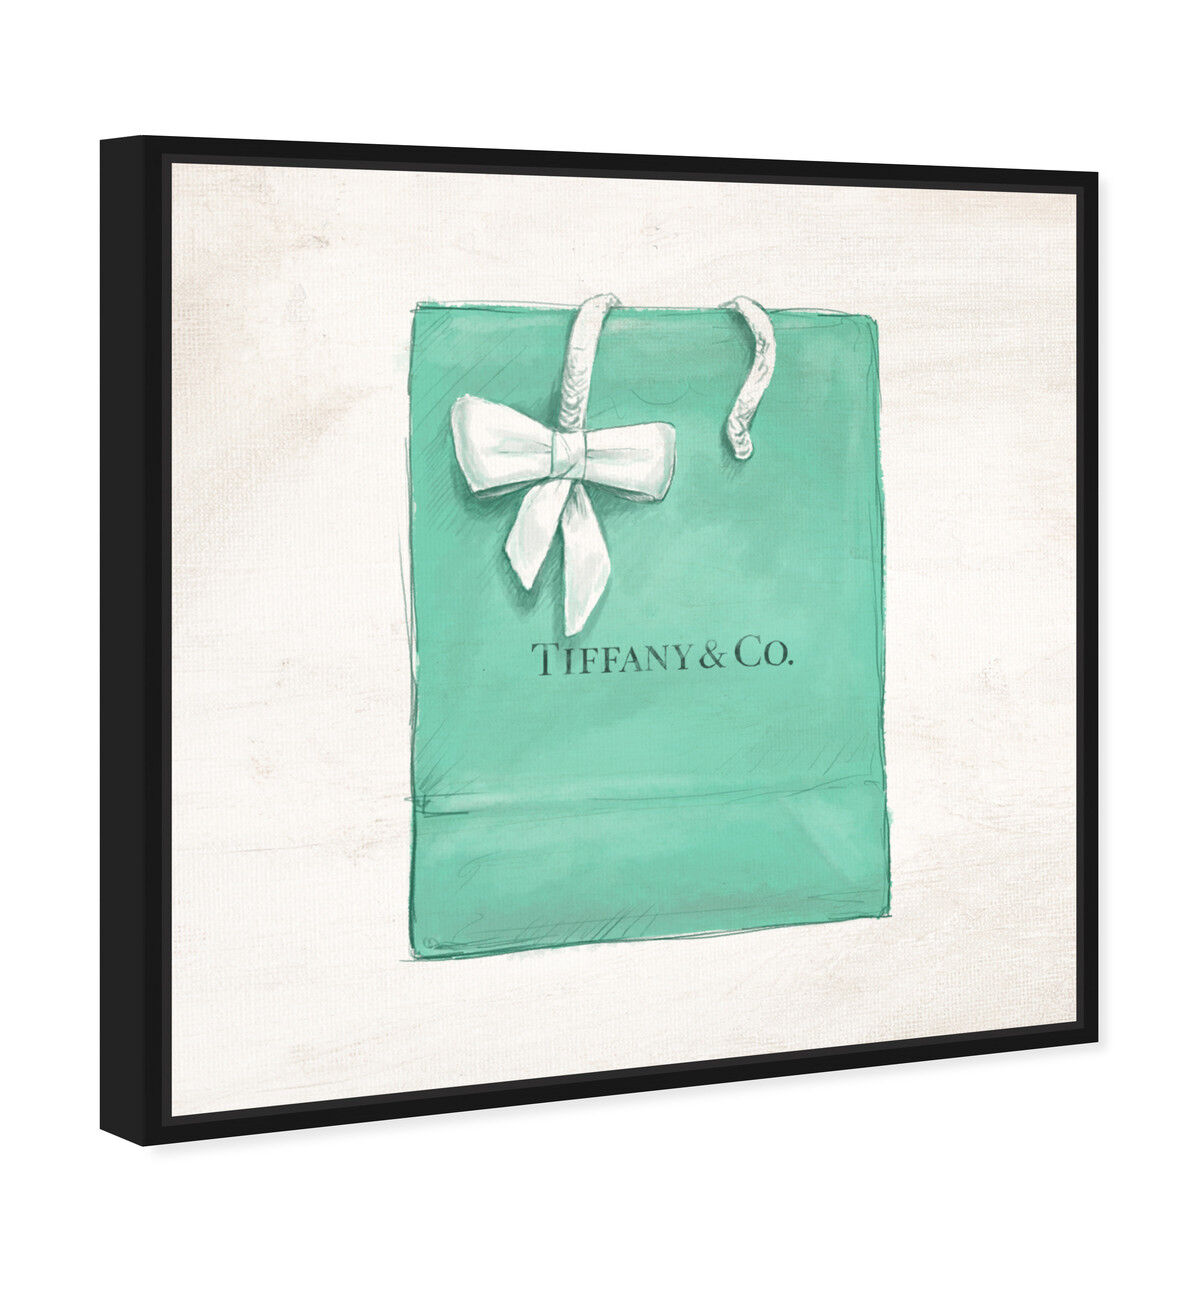 Jewelry Shopping Bag I | Wall Art by Oliver Gal